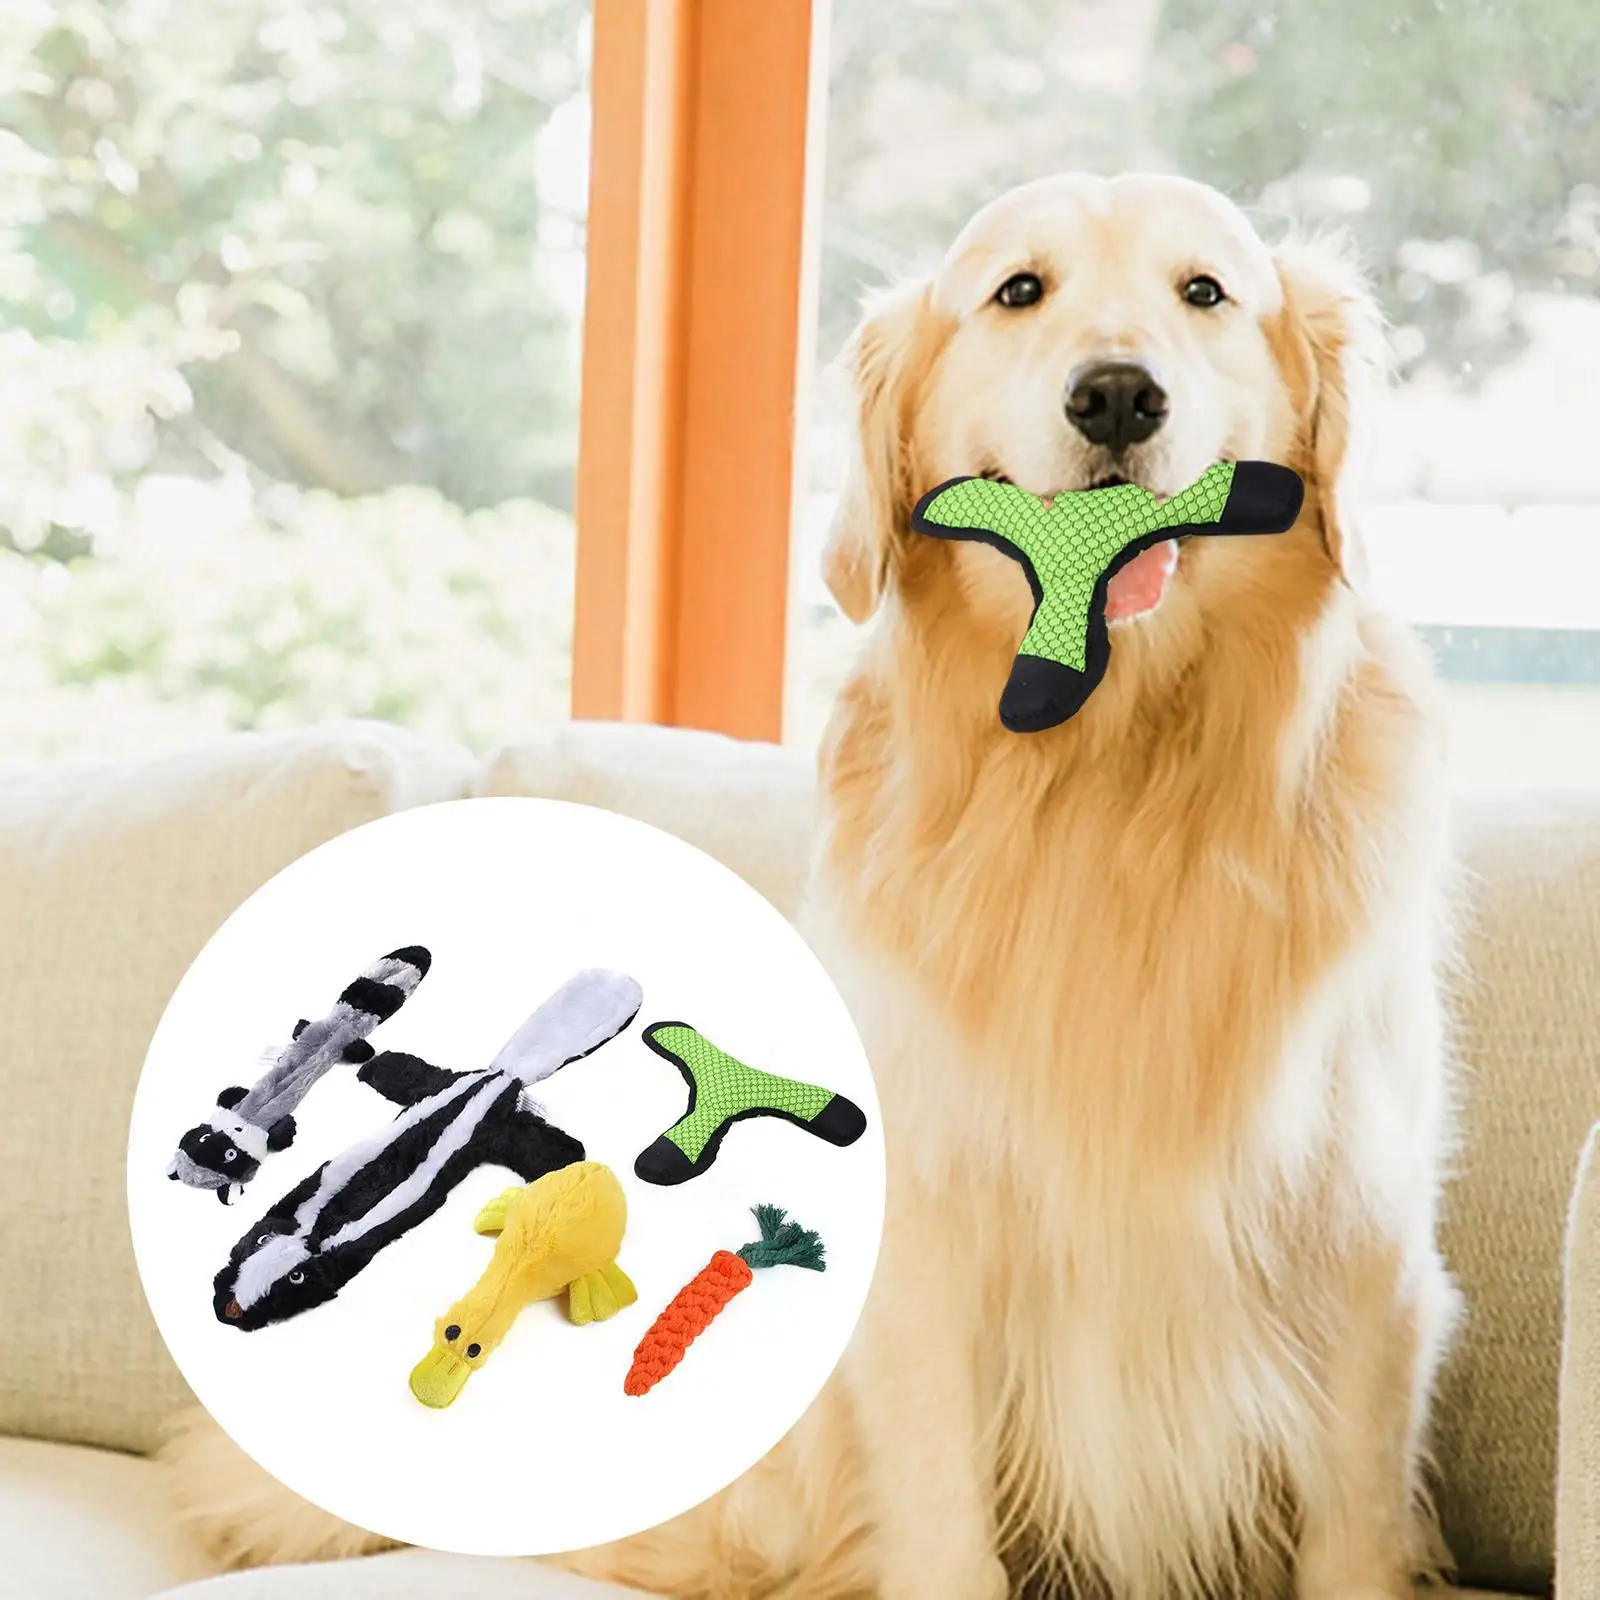 

5pieces Squeaky Dog Toys for Small Large Dogs Animal Shape Plush Pet Puppy Squeakers Chew Bite Resistant Toy Pets Supplies